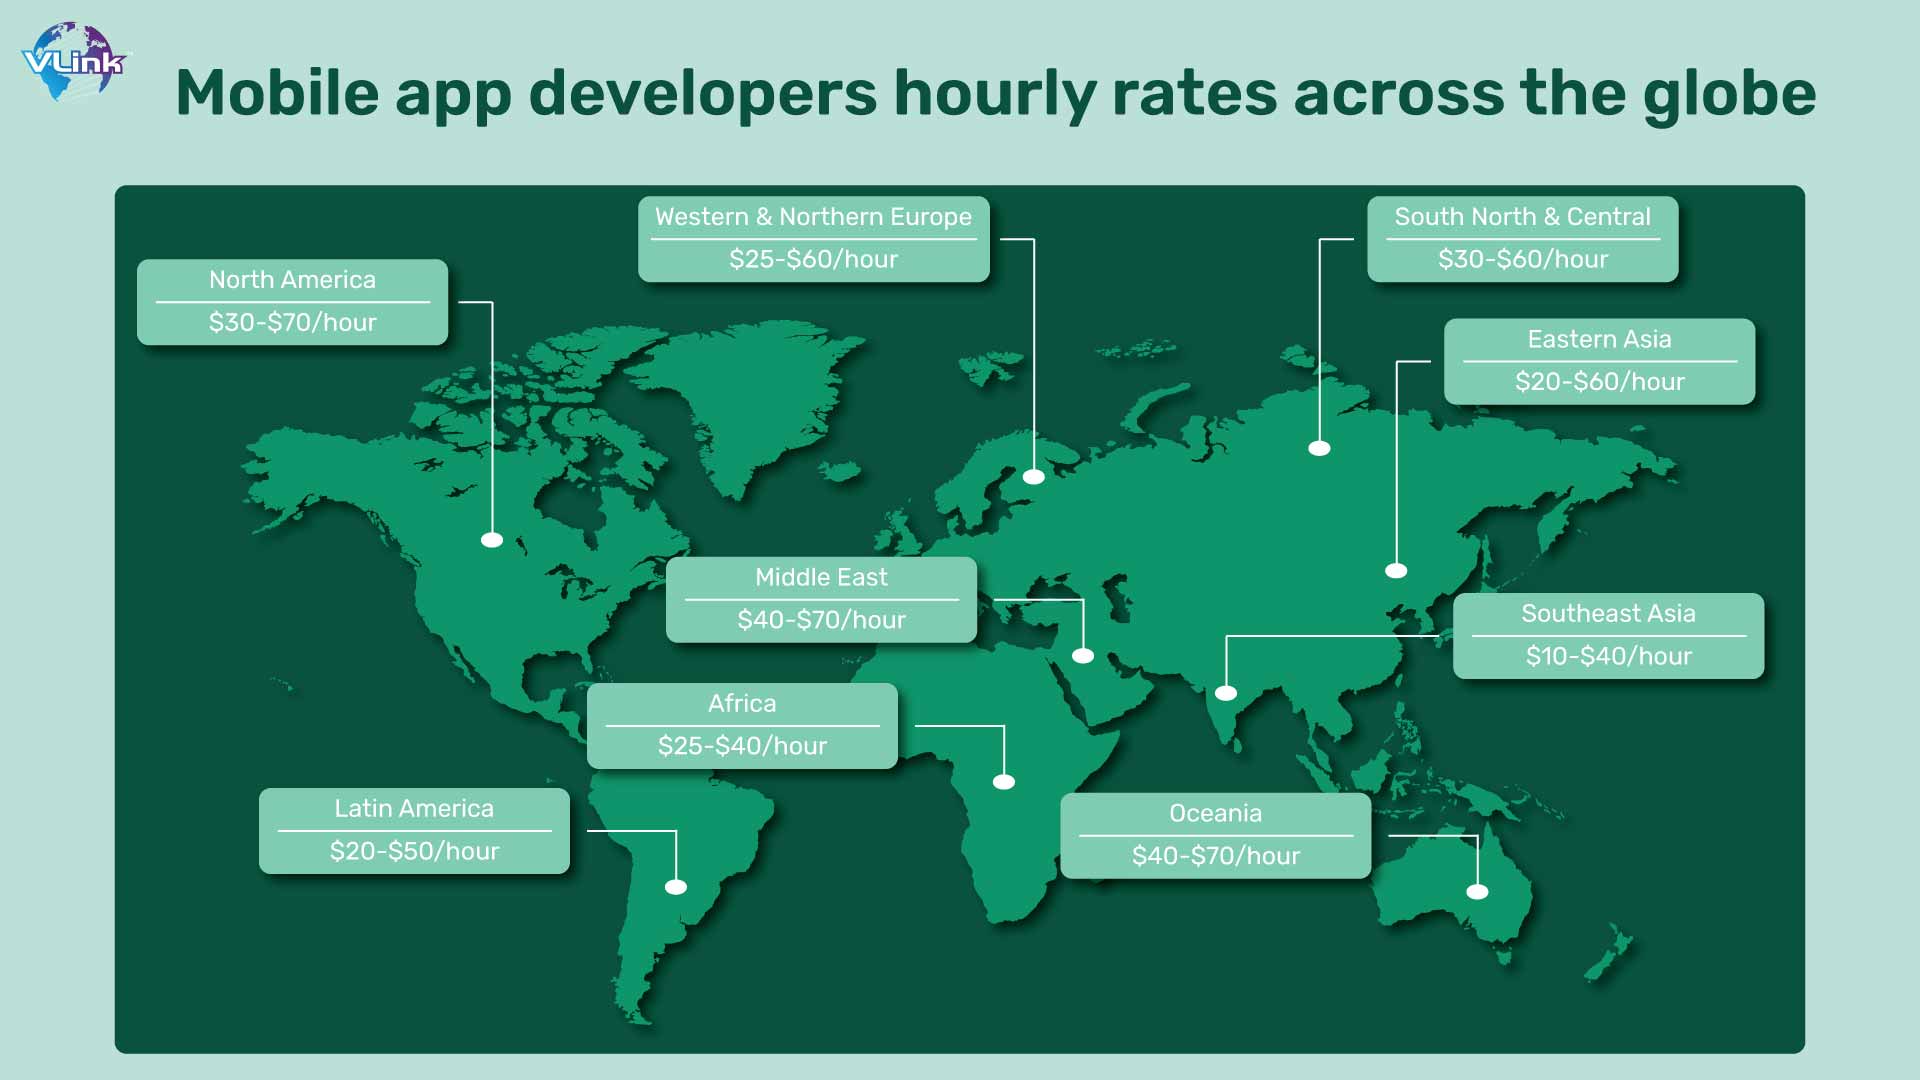 Mobile app developers hourly rates across the globe